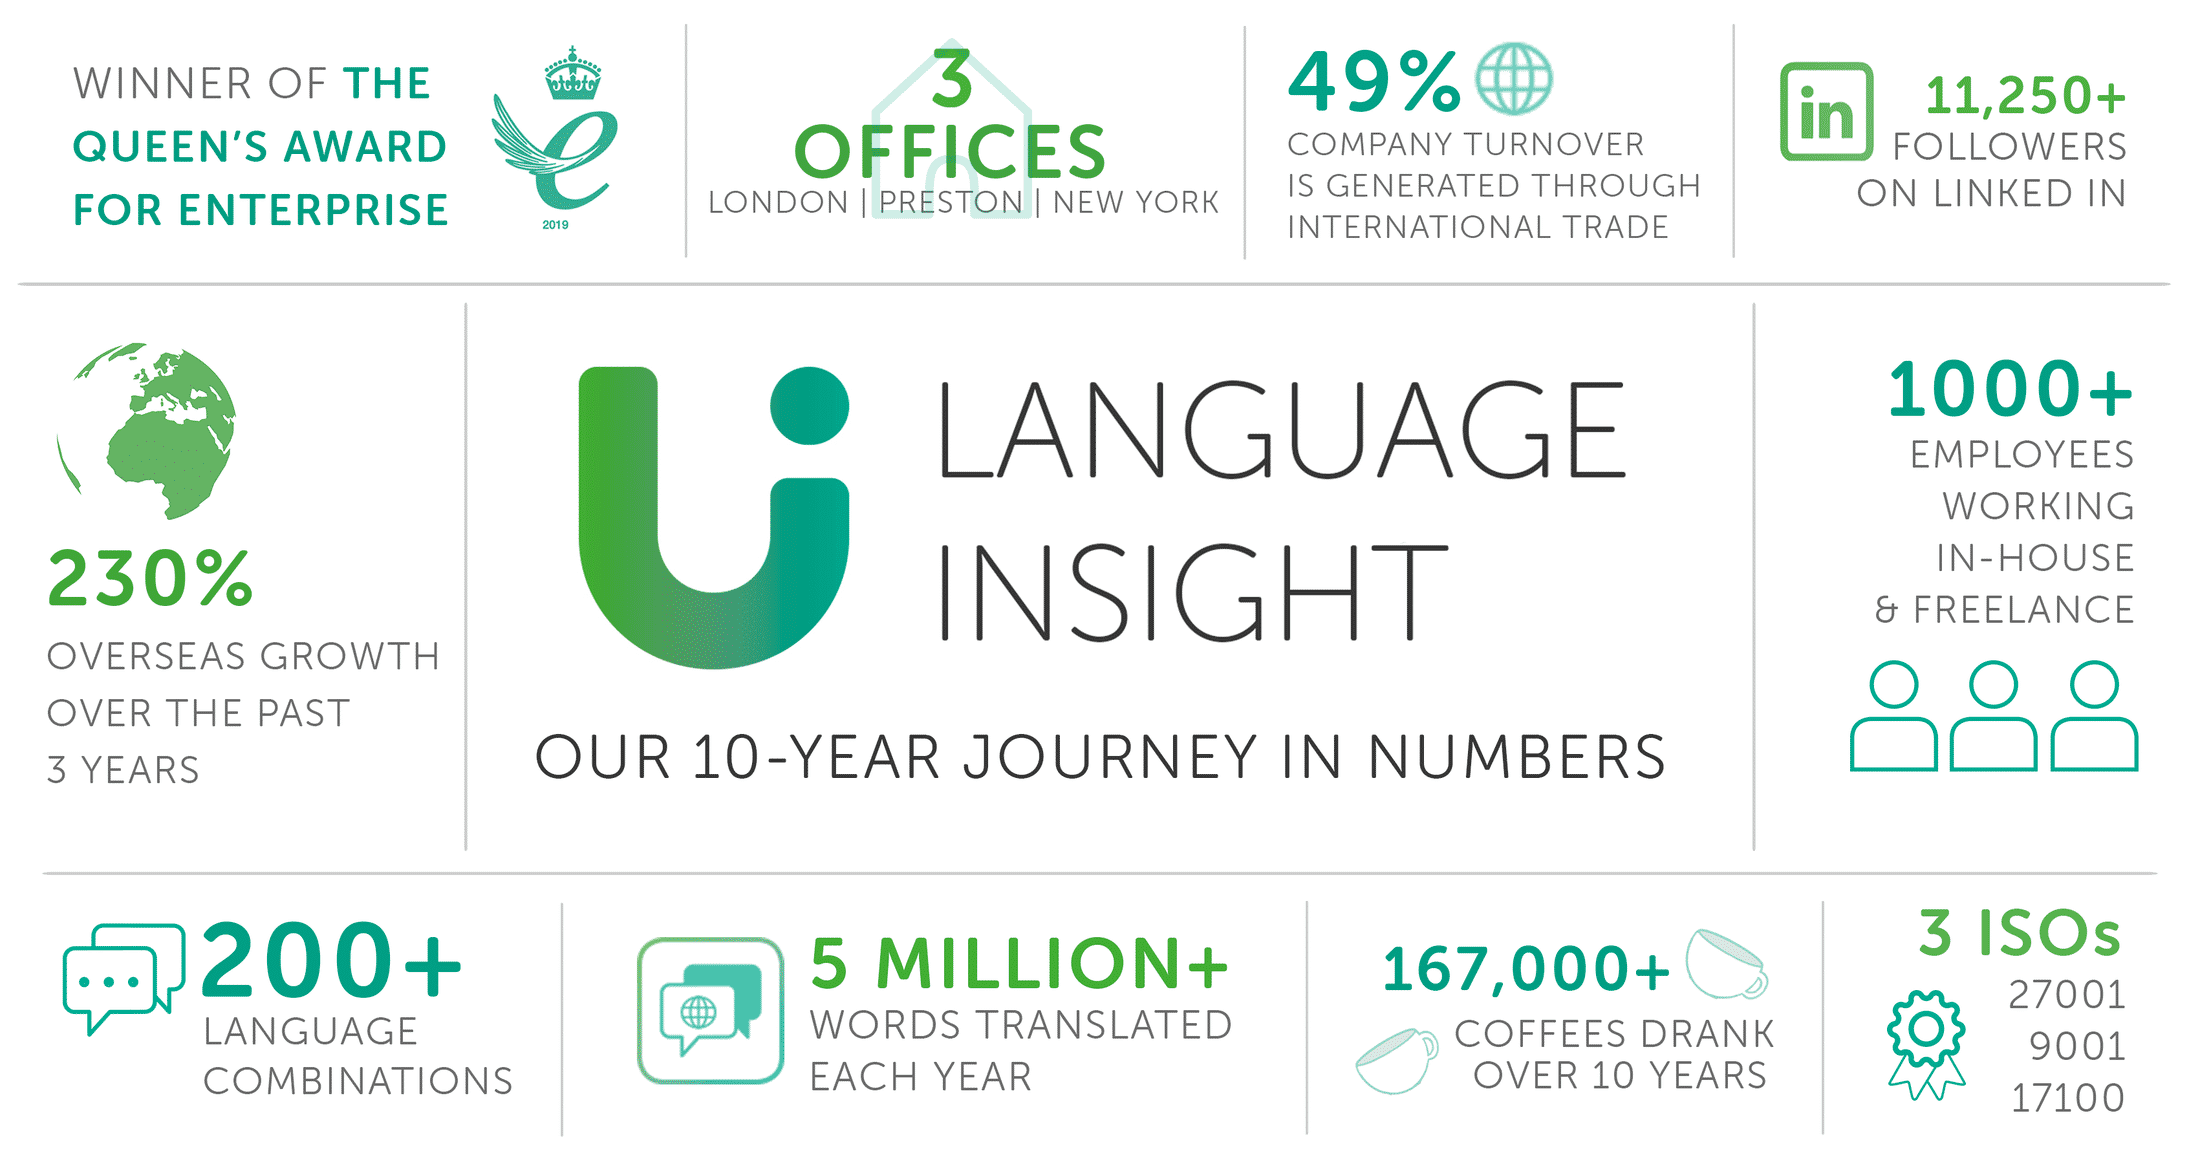 Language Insight's 10-year journey in numbers 